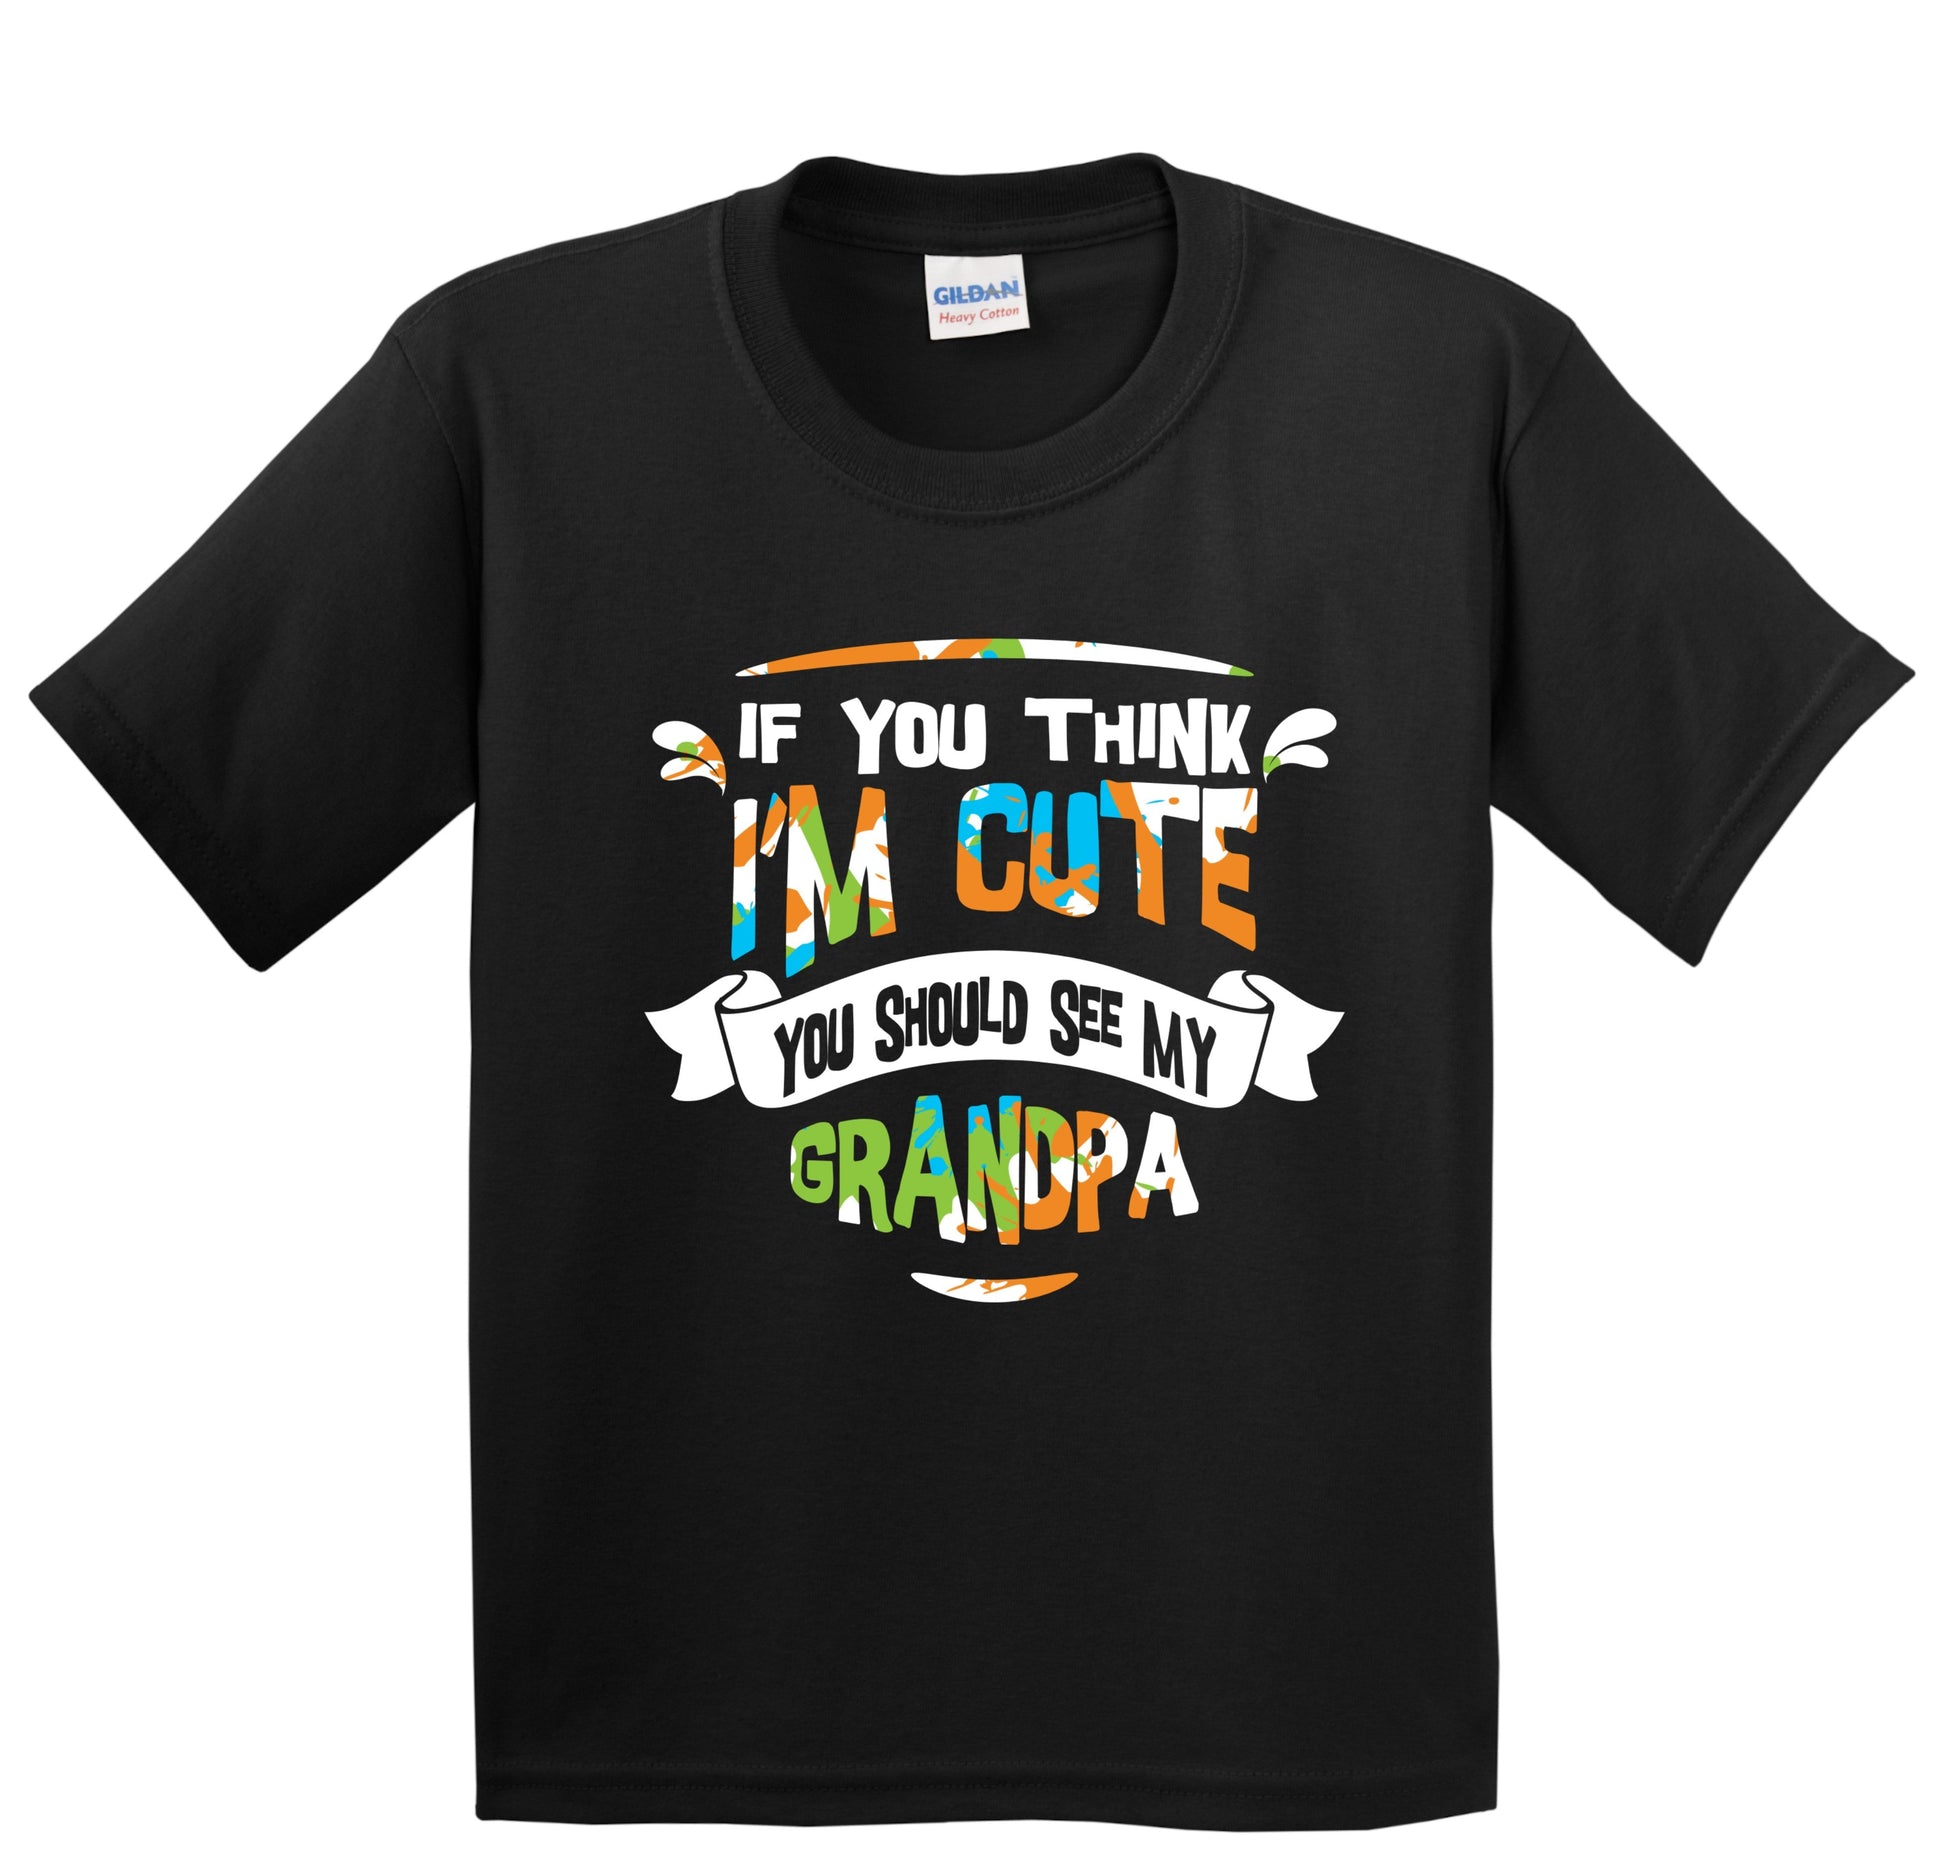 If You Think I'm Cute You Should See My Grandpa Funny Kids T-Shirt